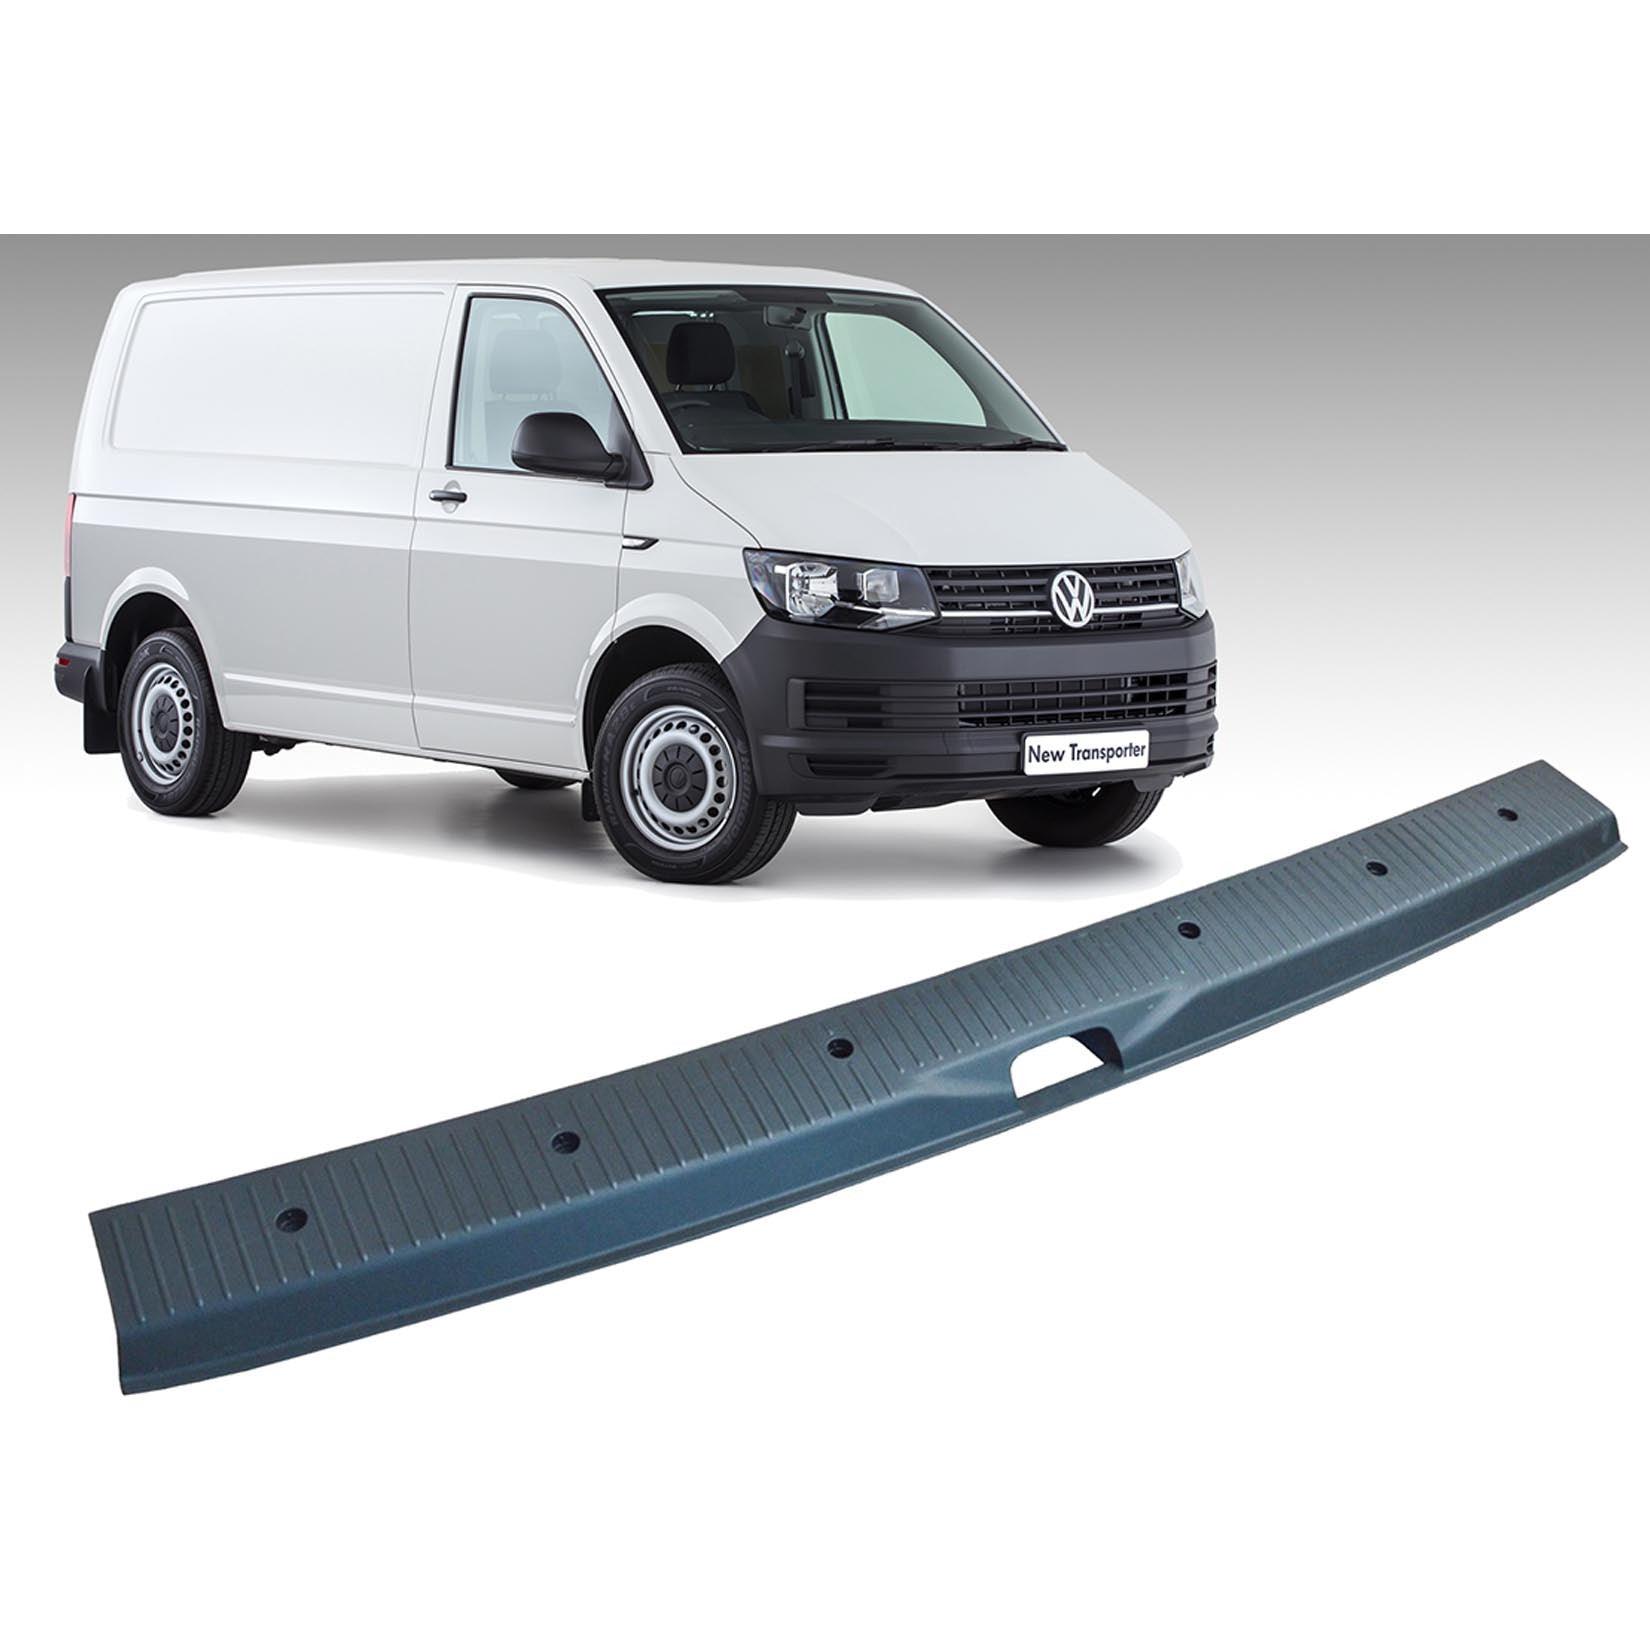 VW TRANSPORTER T5 2010-2015 - REAR THRESHOLD BUMPER PROTECTOR COVER - TAILGATE - Storm Xccessories2